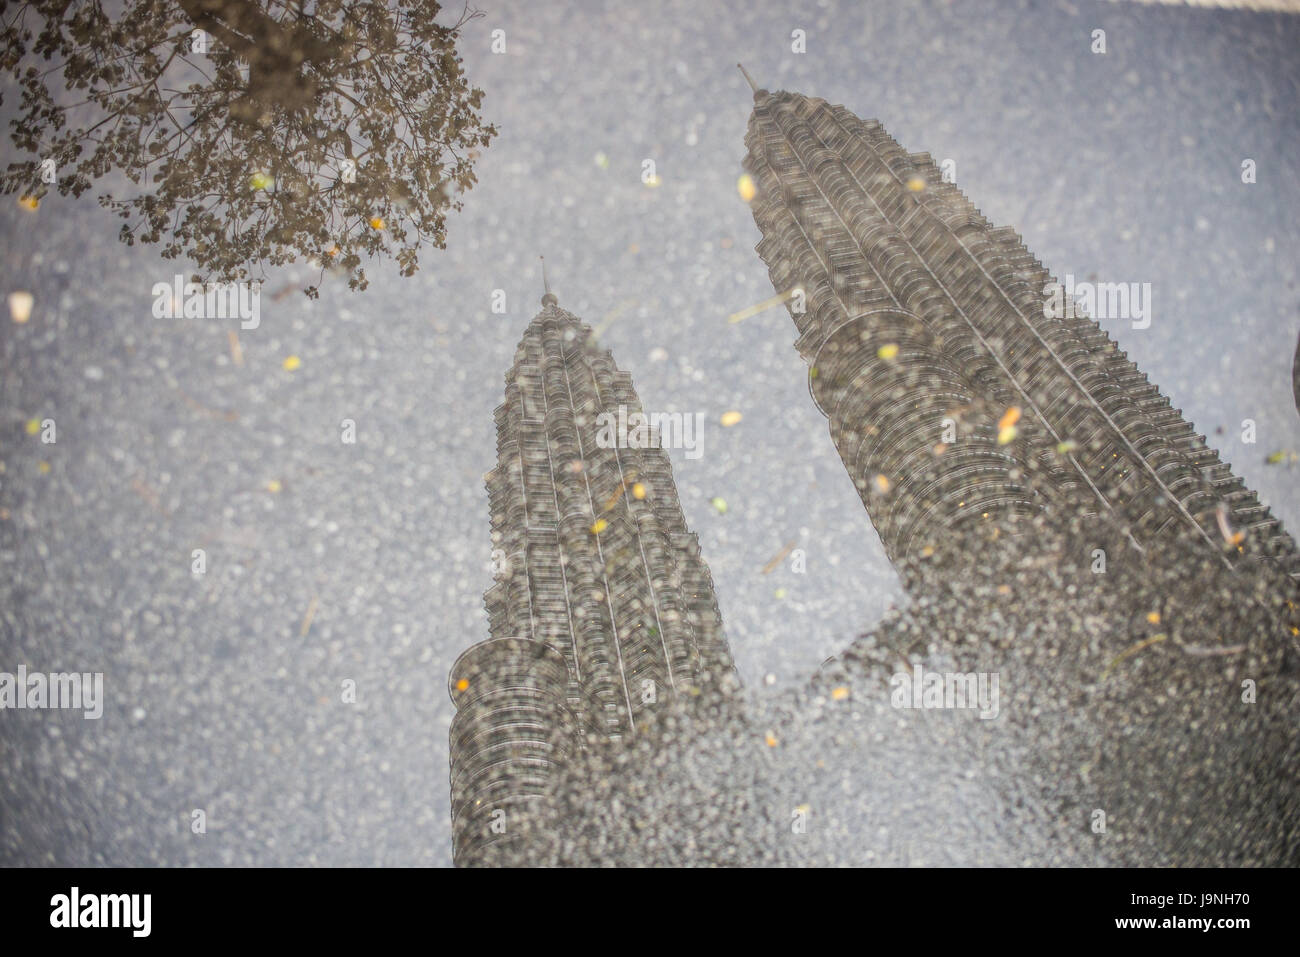 Petronas Towers seen in the reflection of a puddle in the road. Kuala Lumpur, Malaysia. Stock Photo